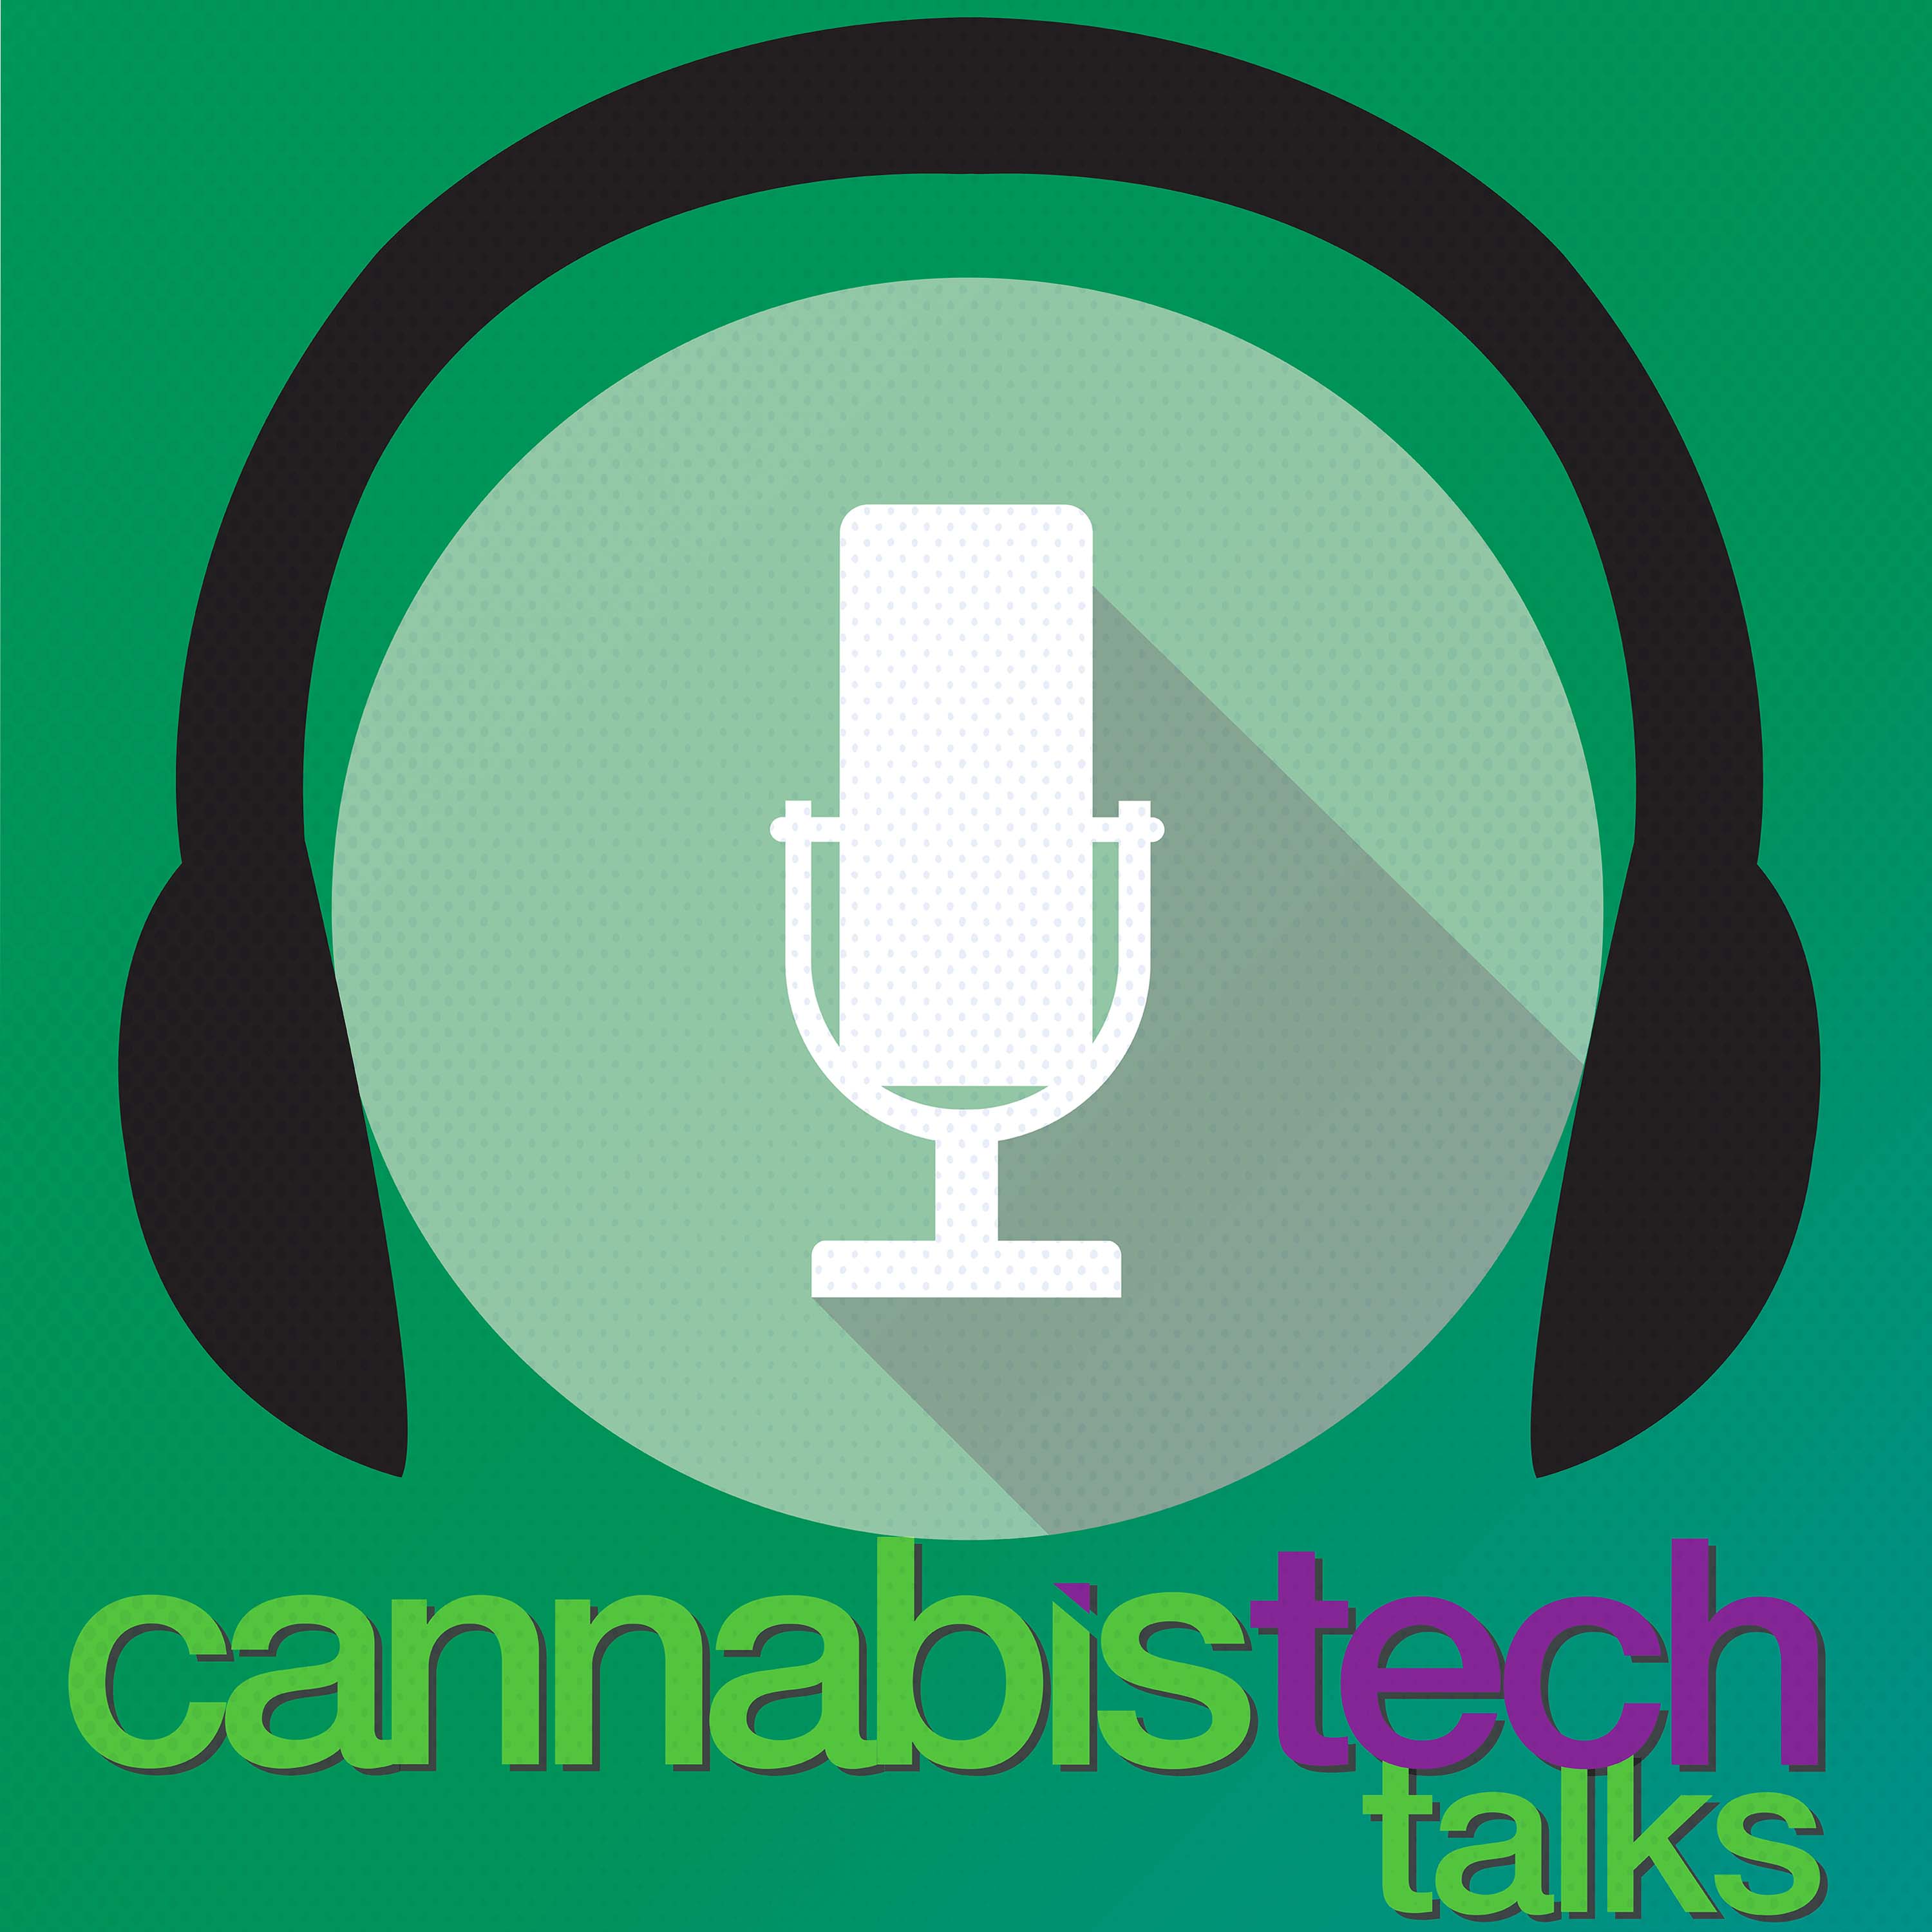 Episode 125: An In-Depth Conversation with DynaVap Founder on Vaporization Technology